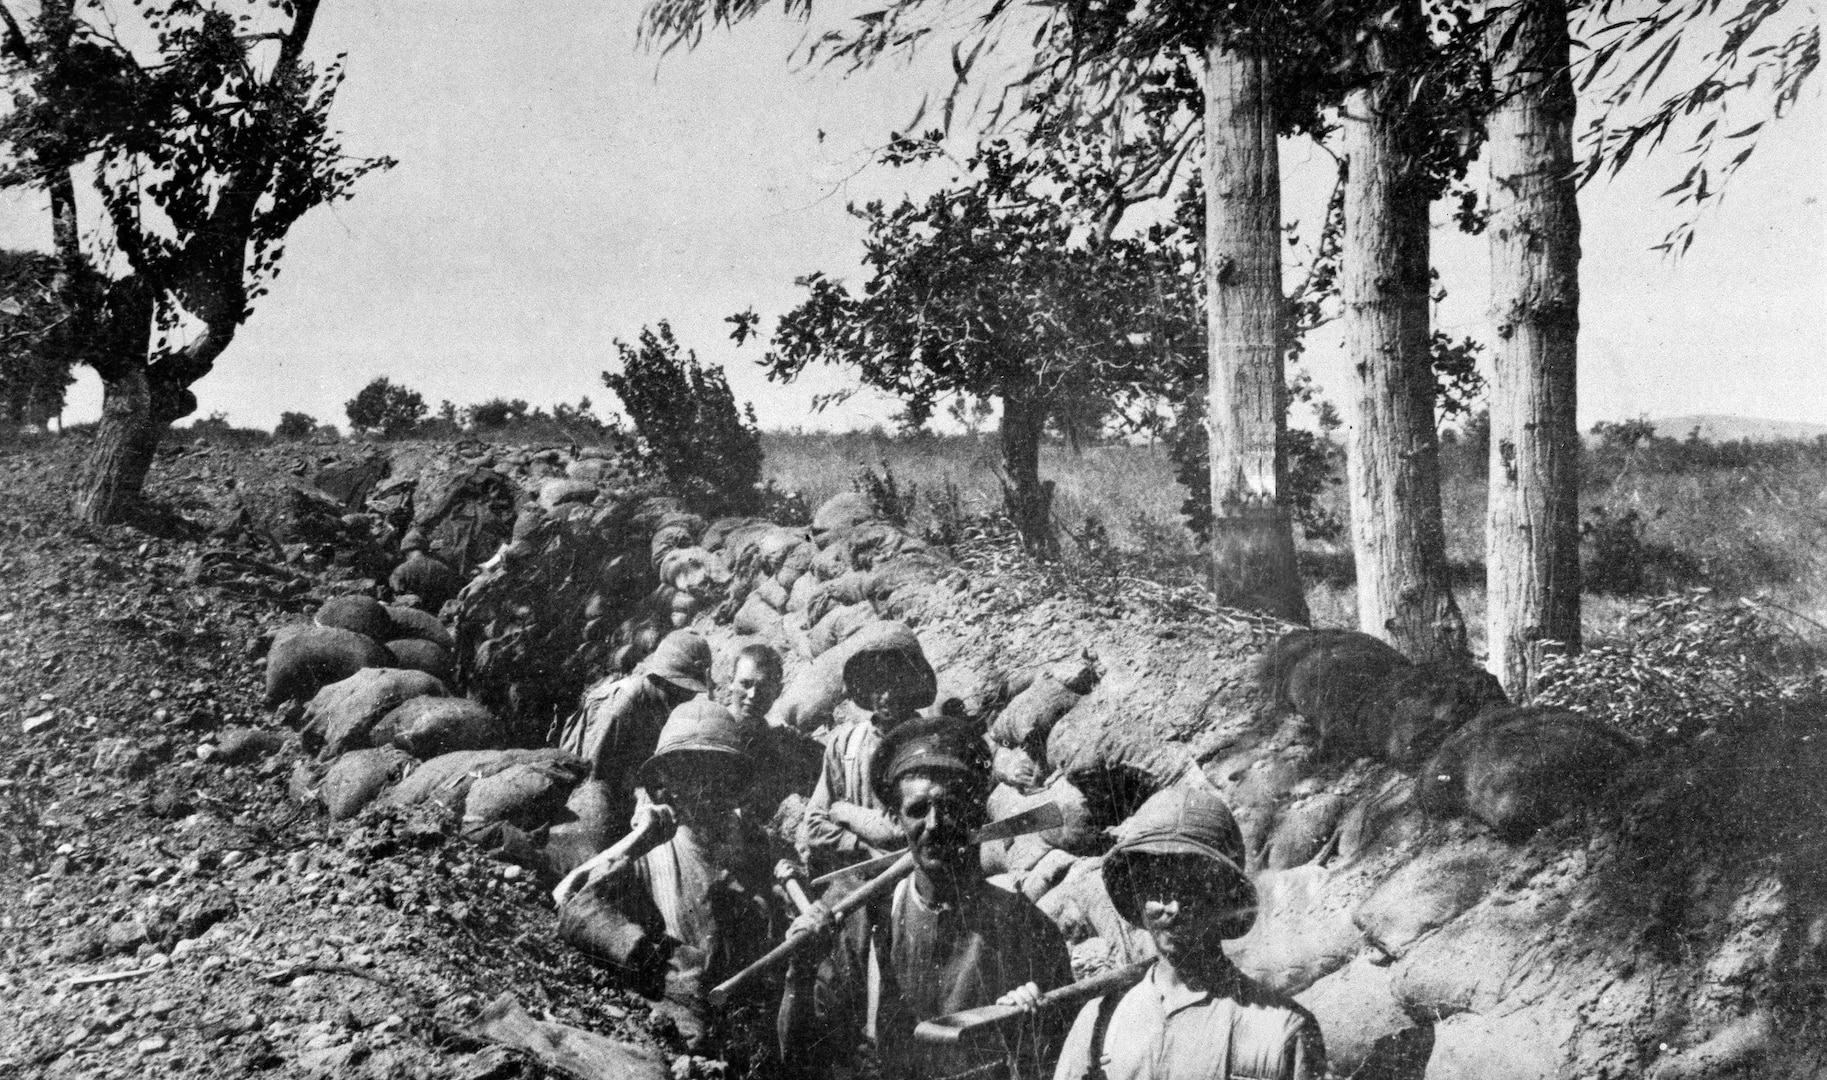 Allied soldiers dug in at Chocolate Hill, Suvla Bay, Gallipoli, August 6, 1915 (National Army Museum/Trooper O. Ward)